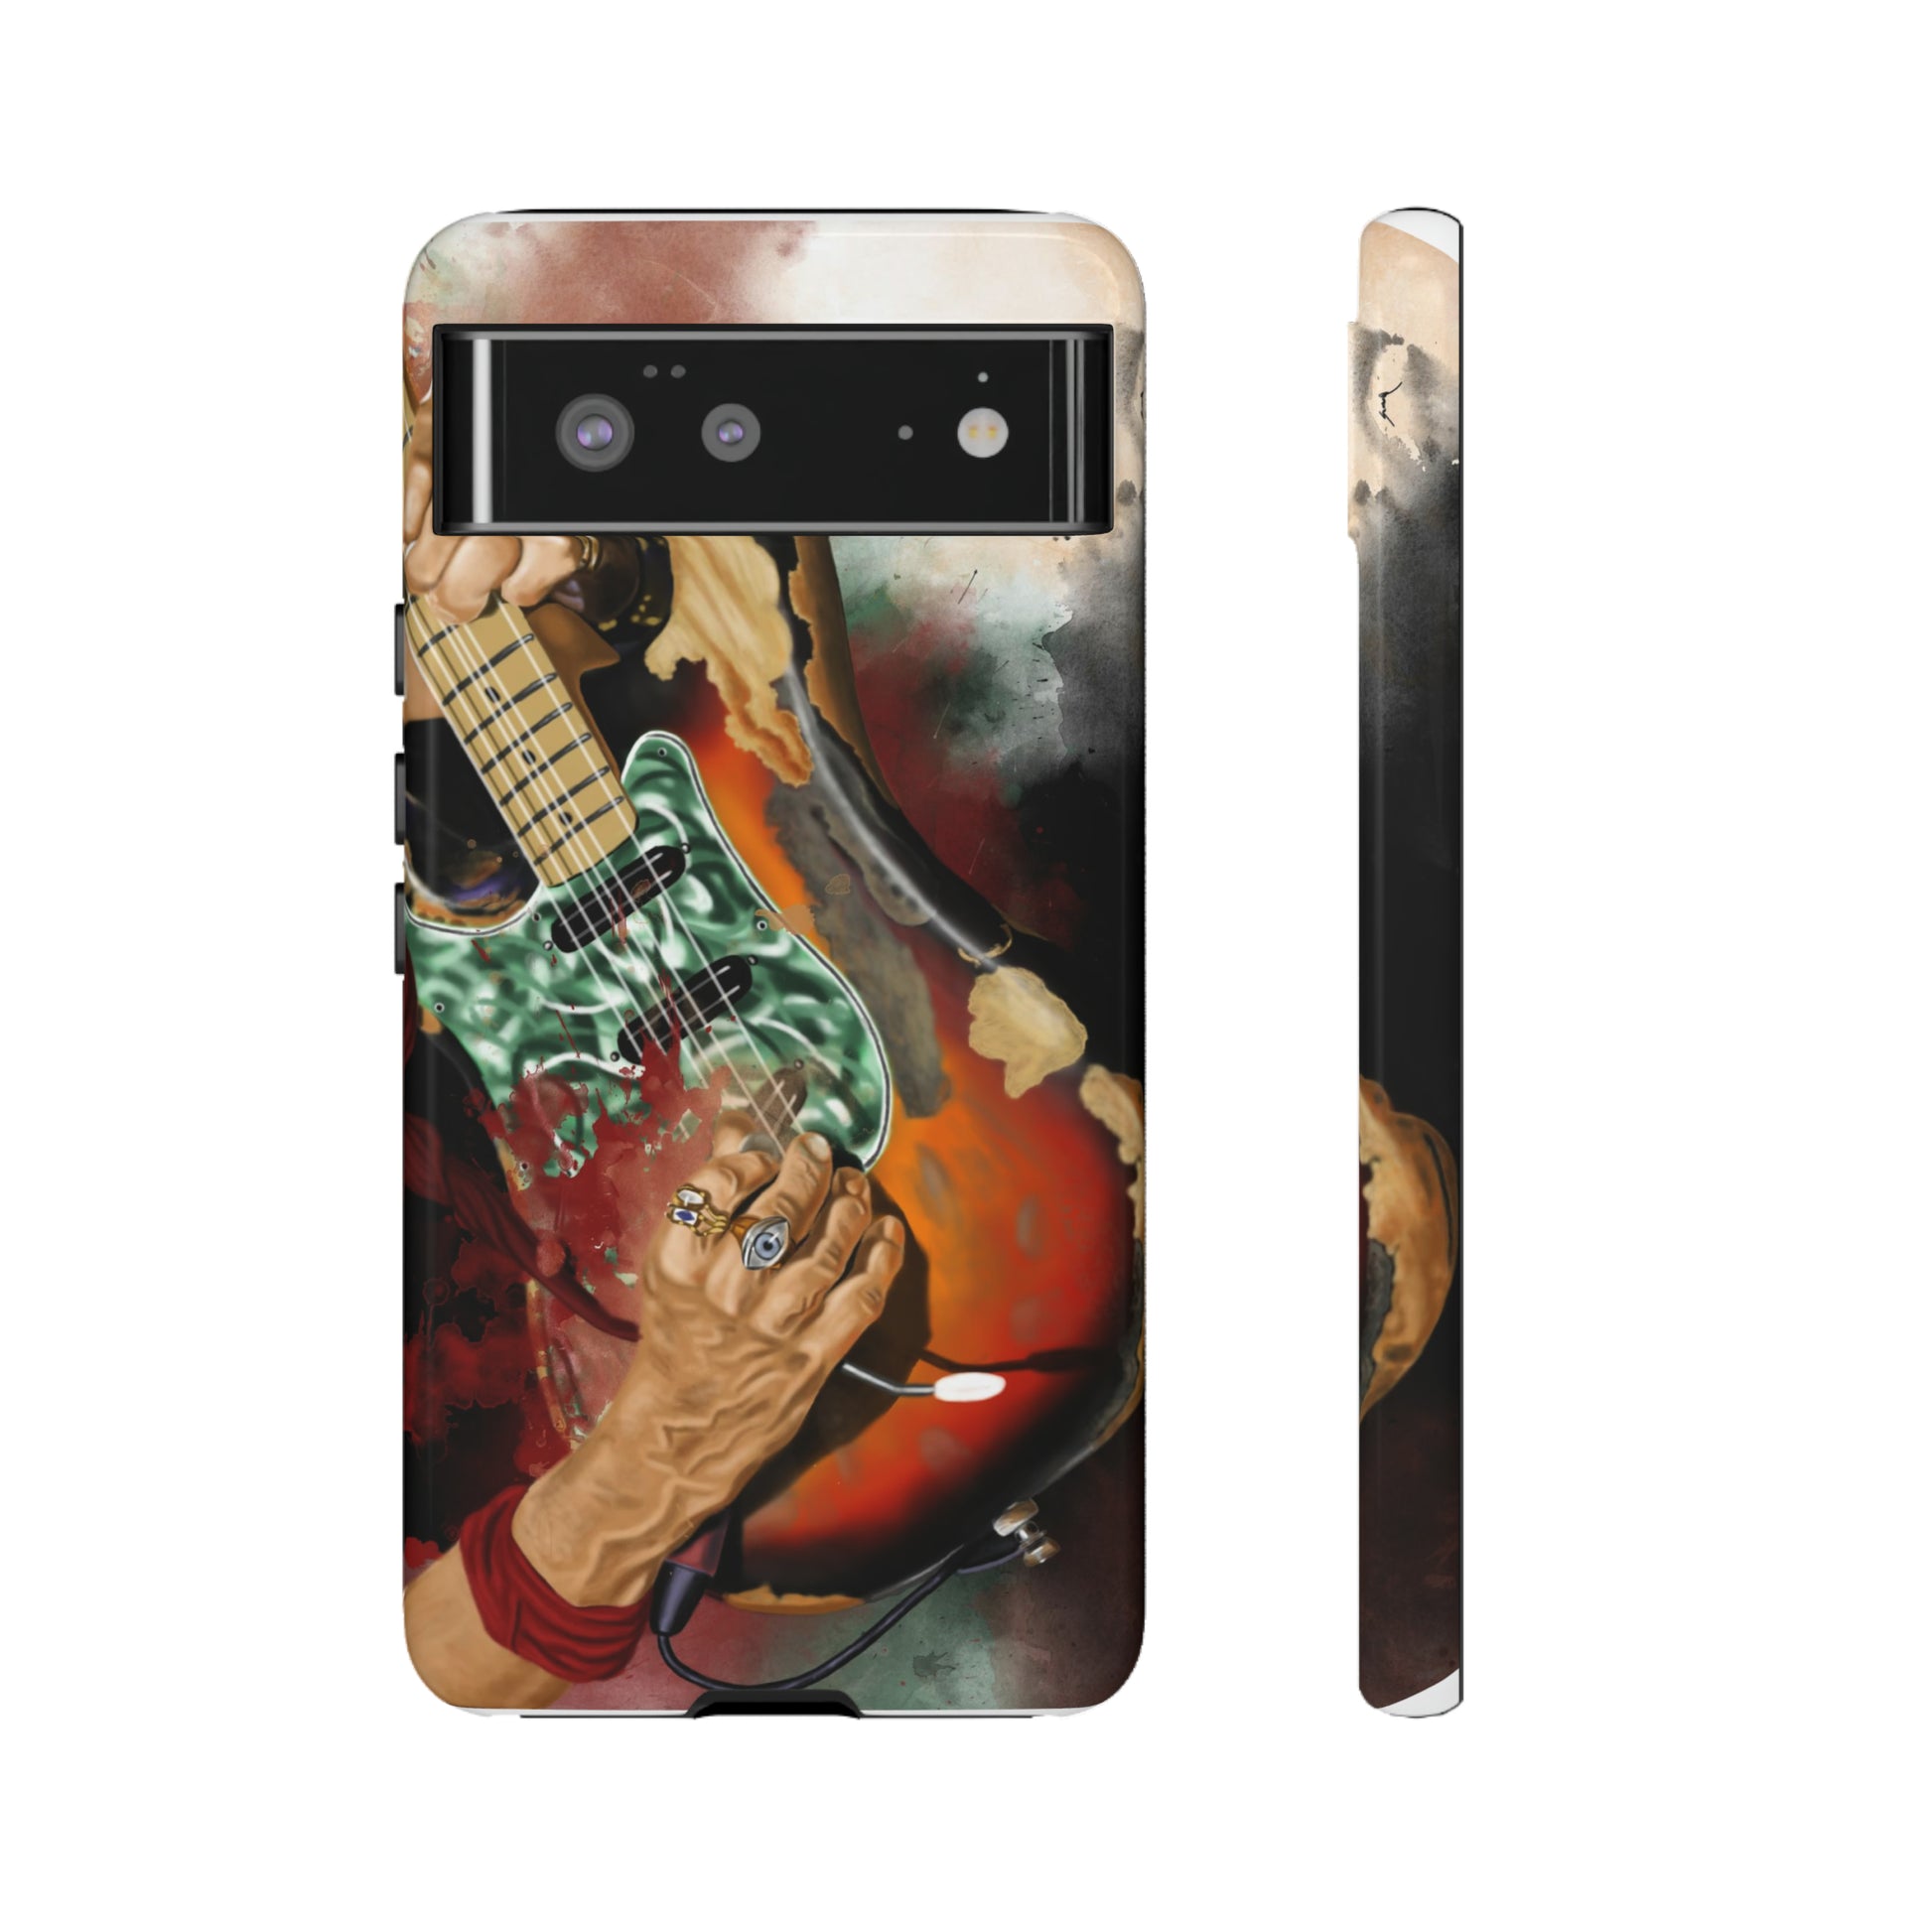 Digital painting of vintage electric guitar with hands printed on google phone case